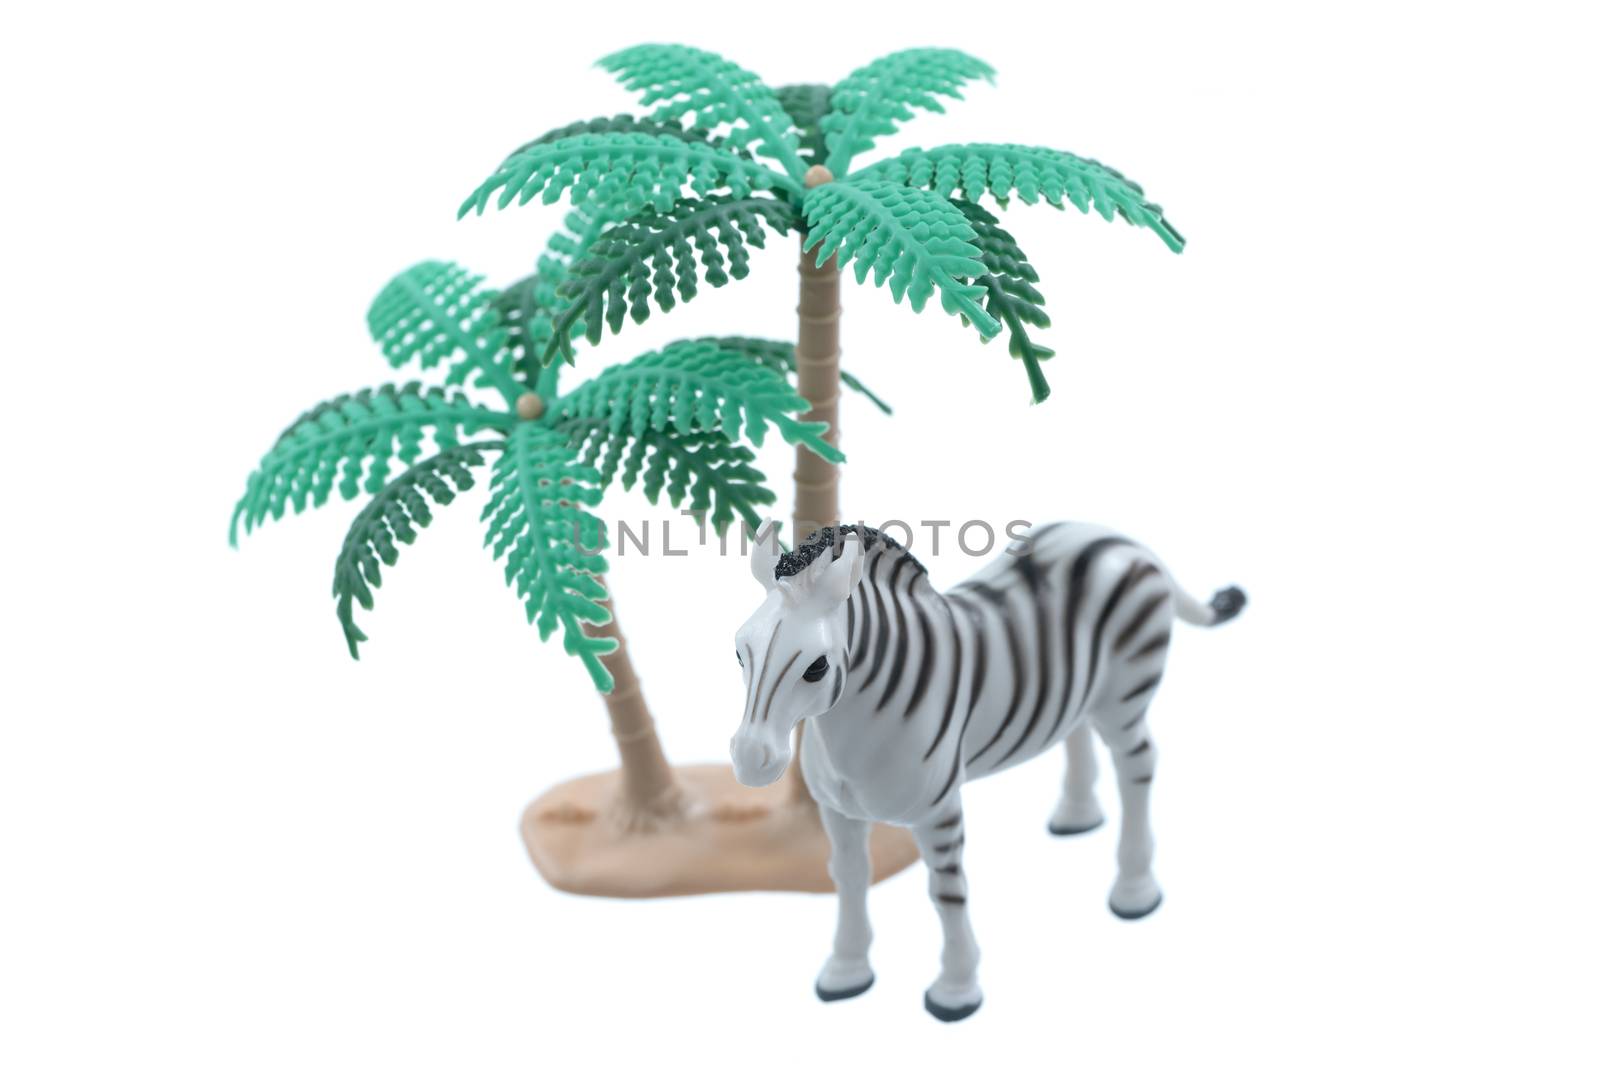 Toy Zebra with Trees by justtscott